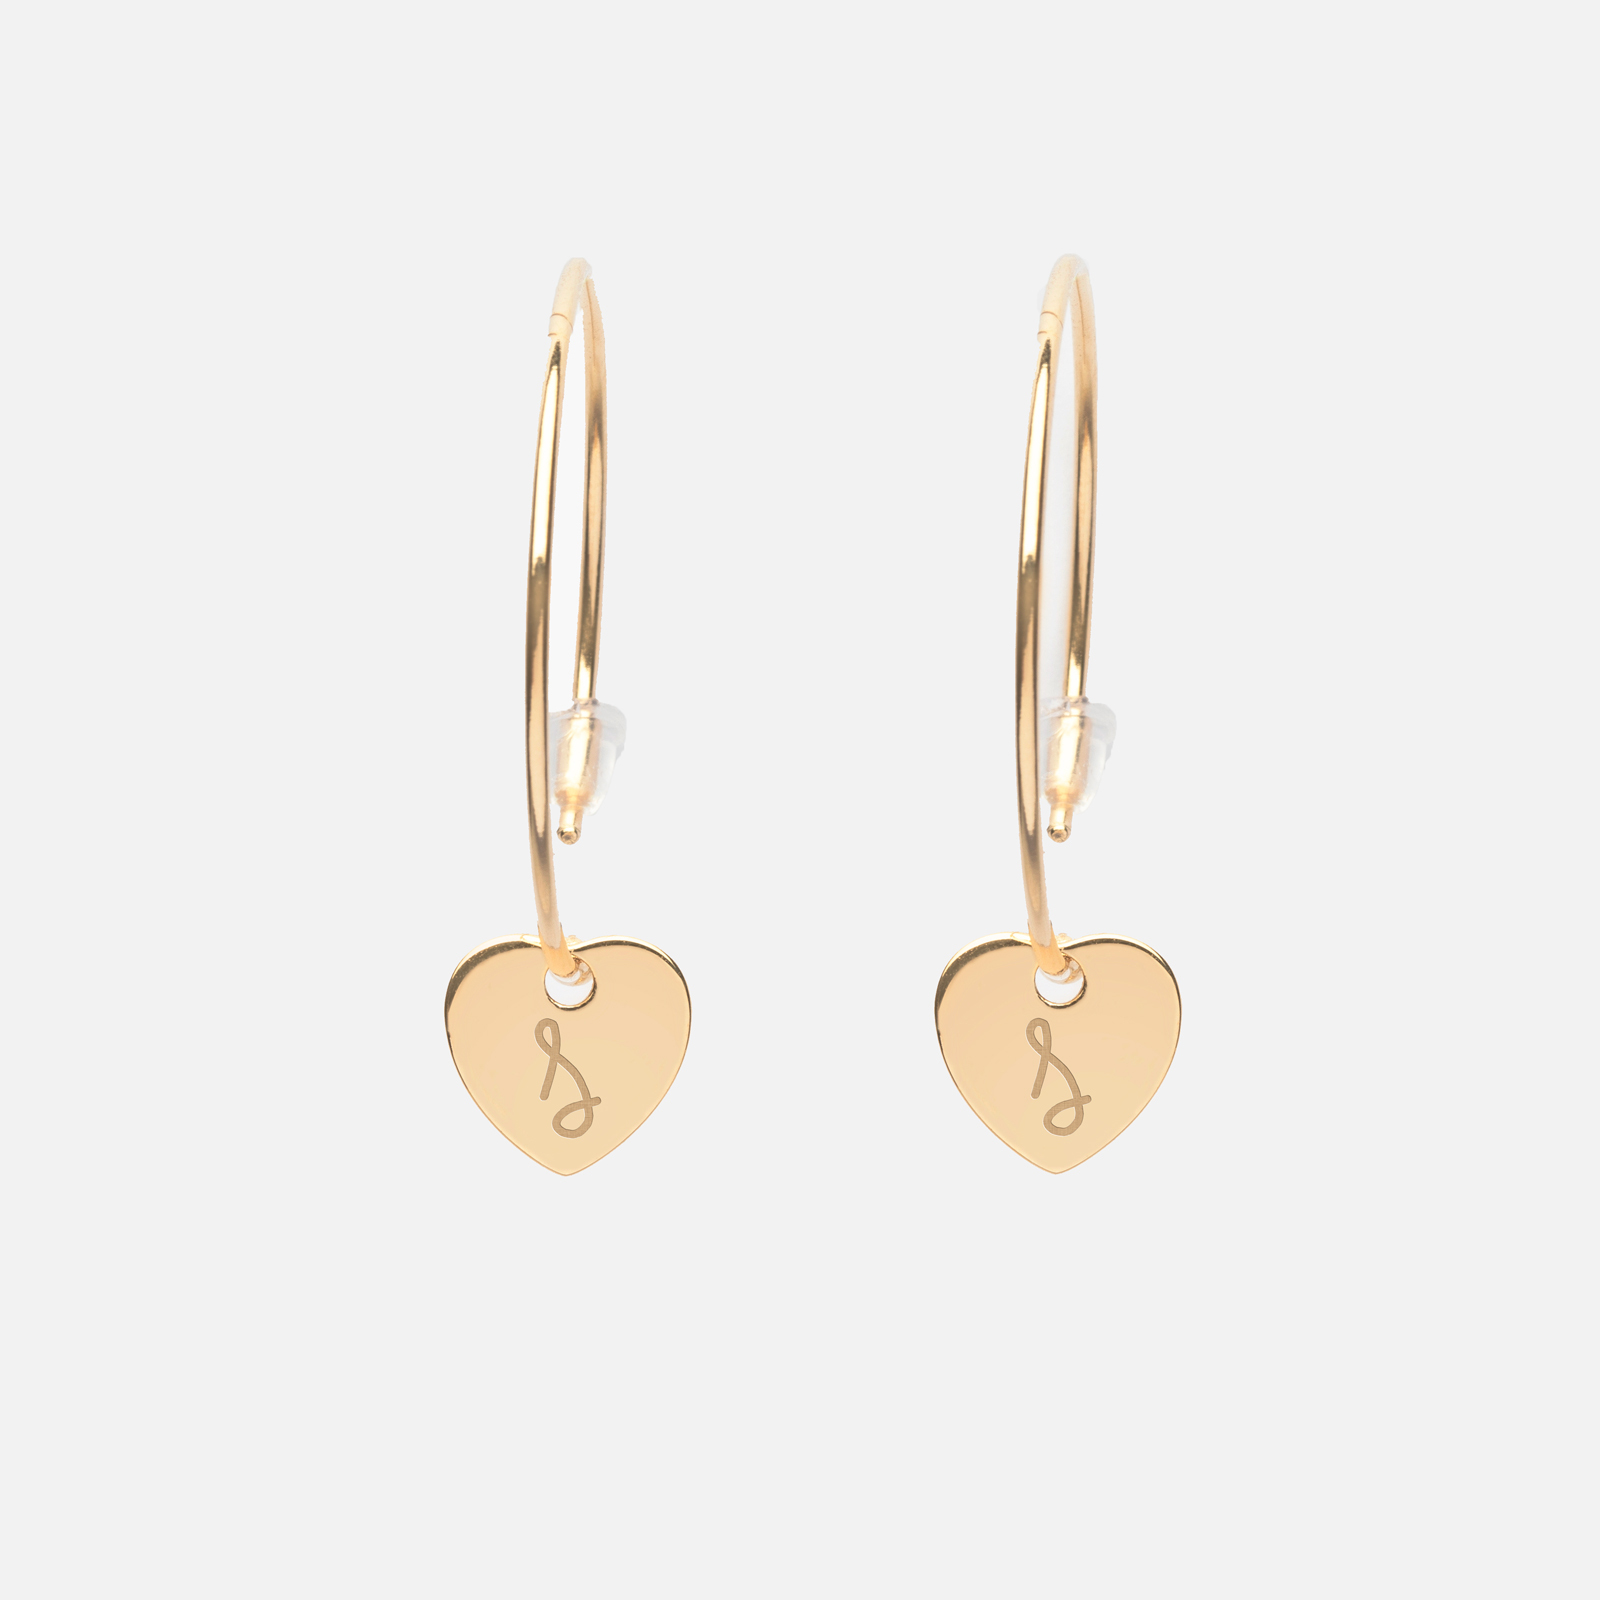 Creole earrings personalised with engraved gold-plated medals initial heart 10 mm